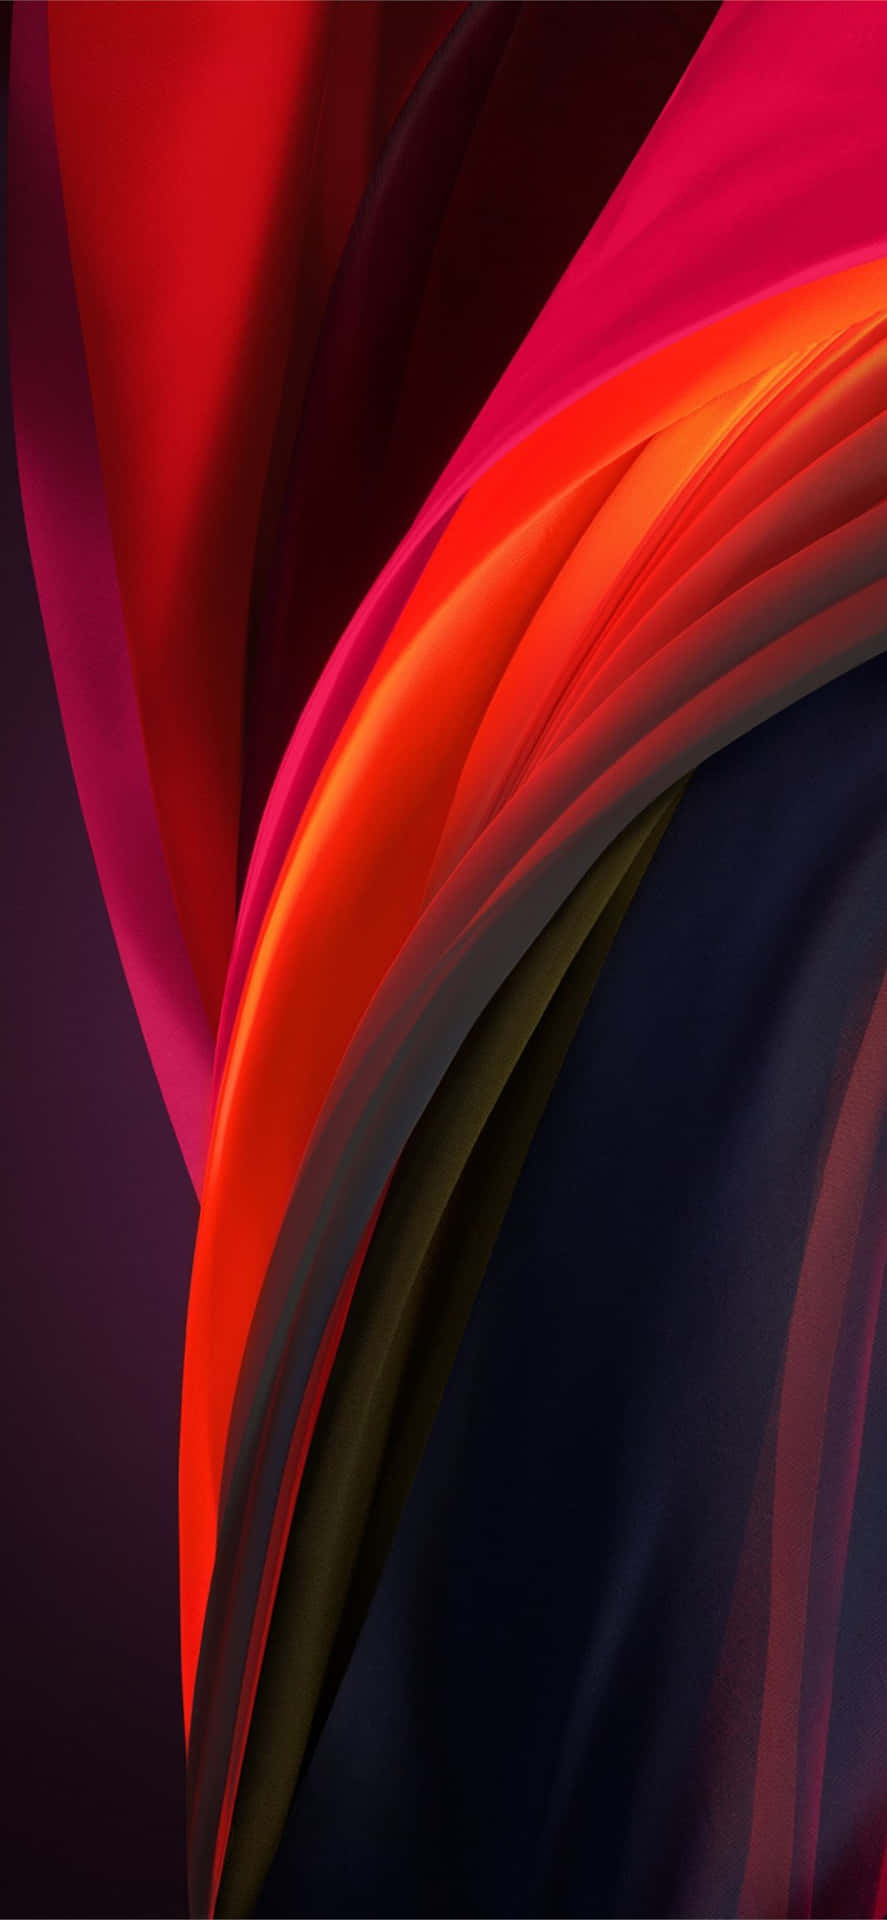 A Colorful Abstract Background With A Red, Orange, And Black Color Wallpaper